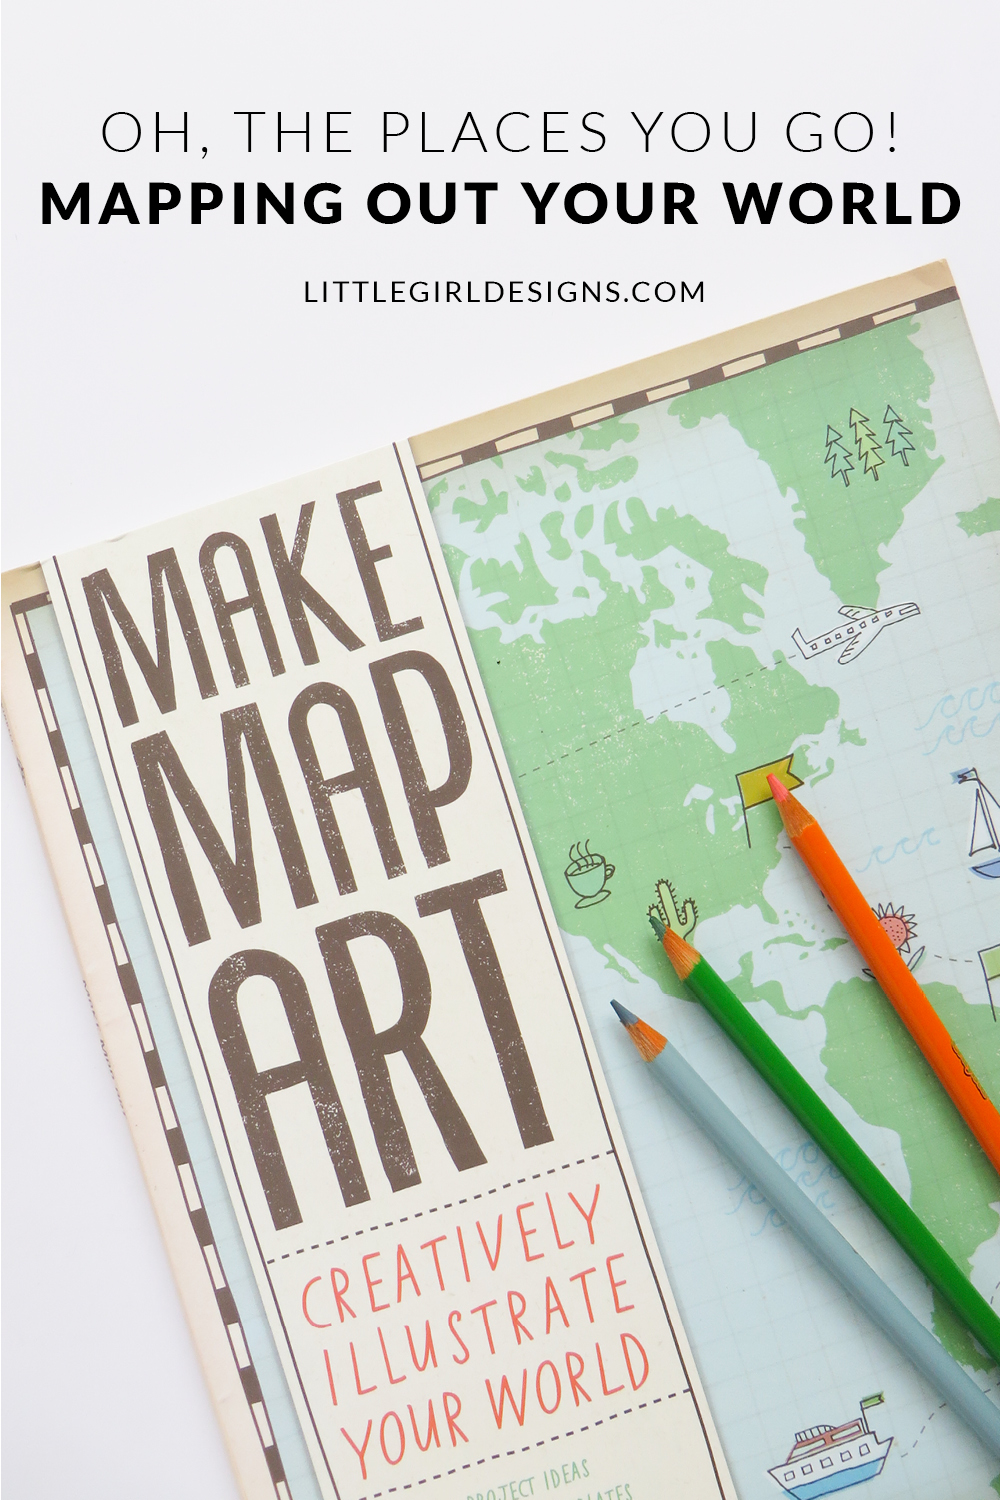 Mapping Out Your World - Have you ever made a map of your world? The places you walk with your friends? The memories you made in college? The dreams you have for your future? This is such a fun practice AND it makes a great birthday gift too! via littlegirldesigns.com